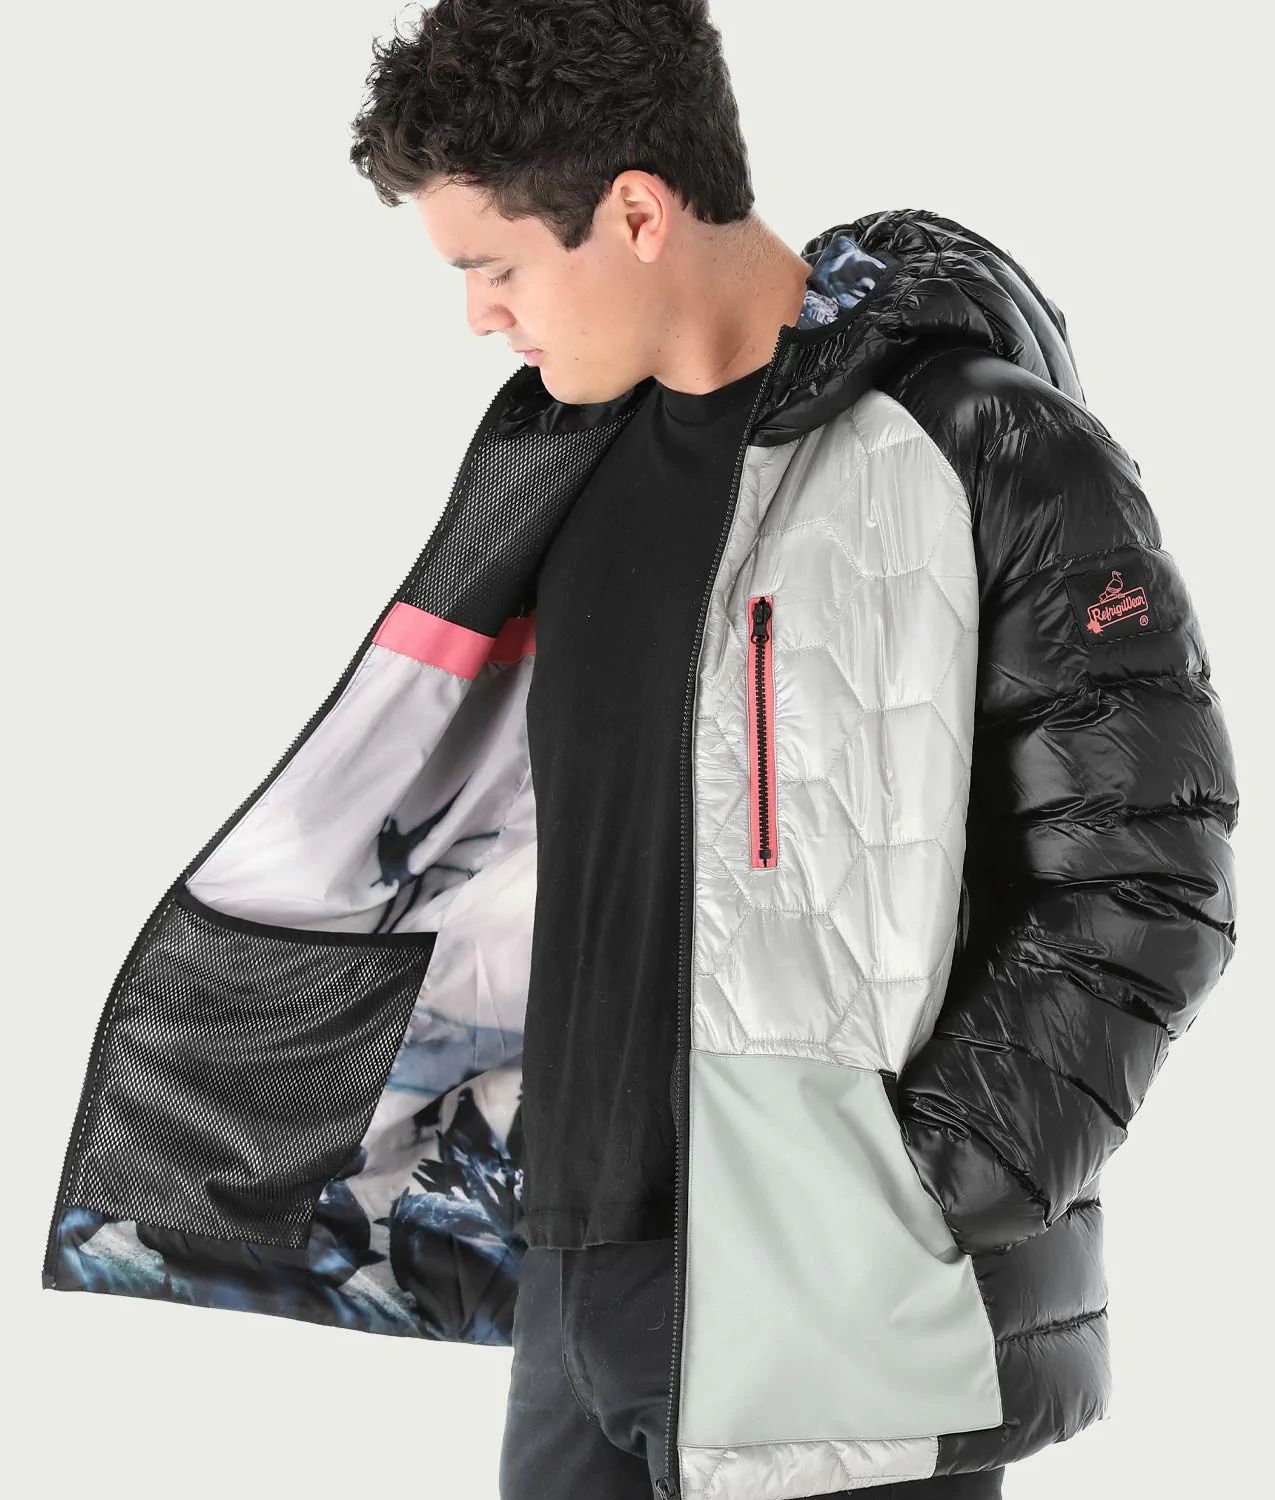 Refrigiwear Limited Edition Bubble Jacket with Hood